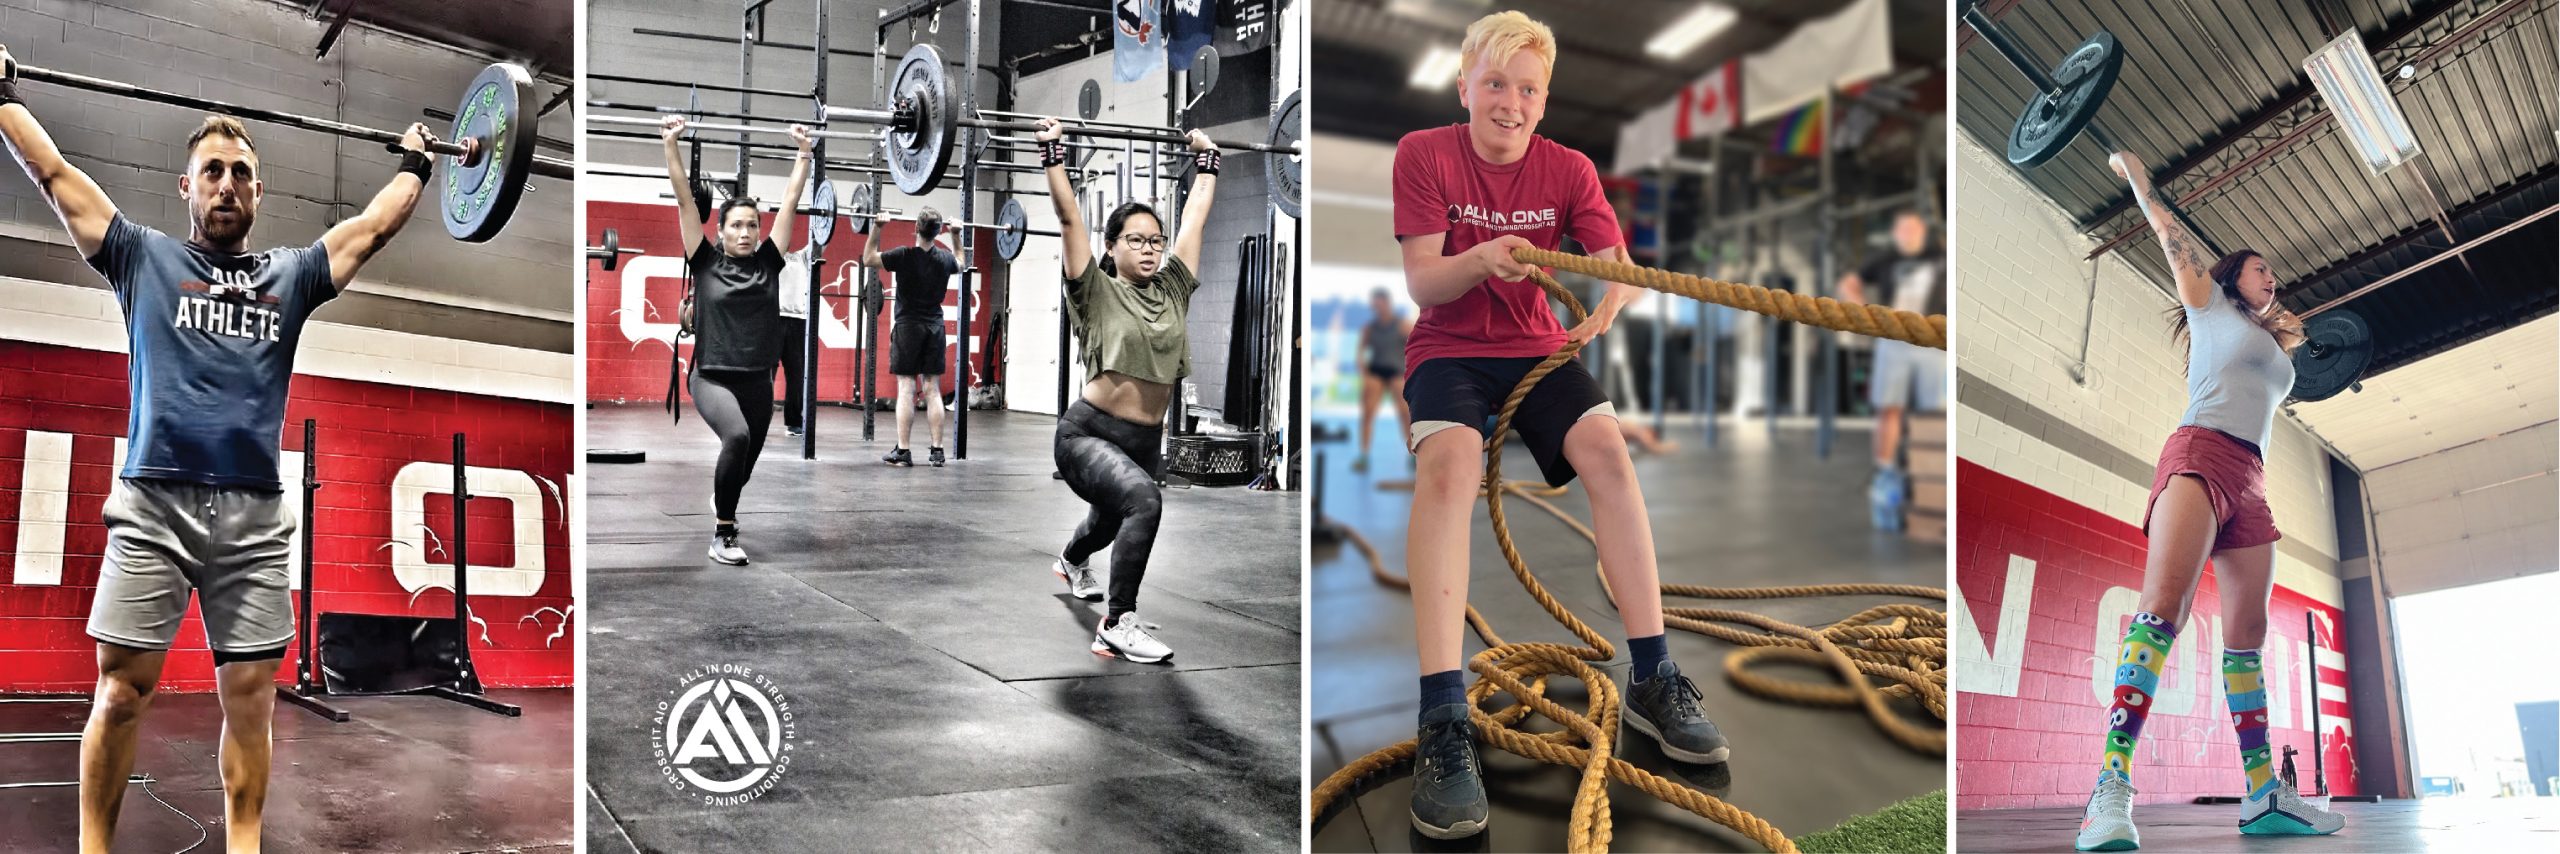 9 Reasons Why AIO Is The Best CrossFit Box In Toronto